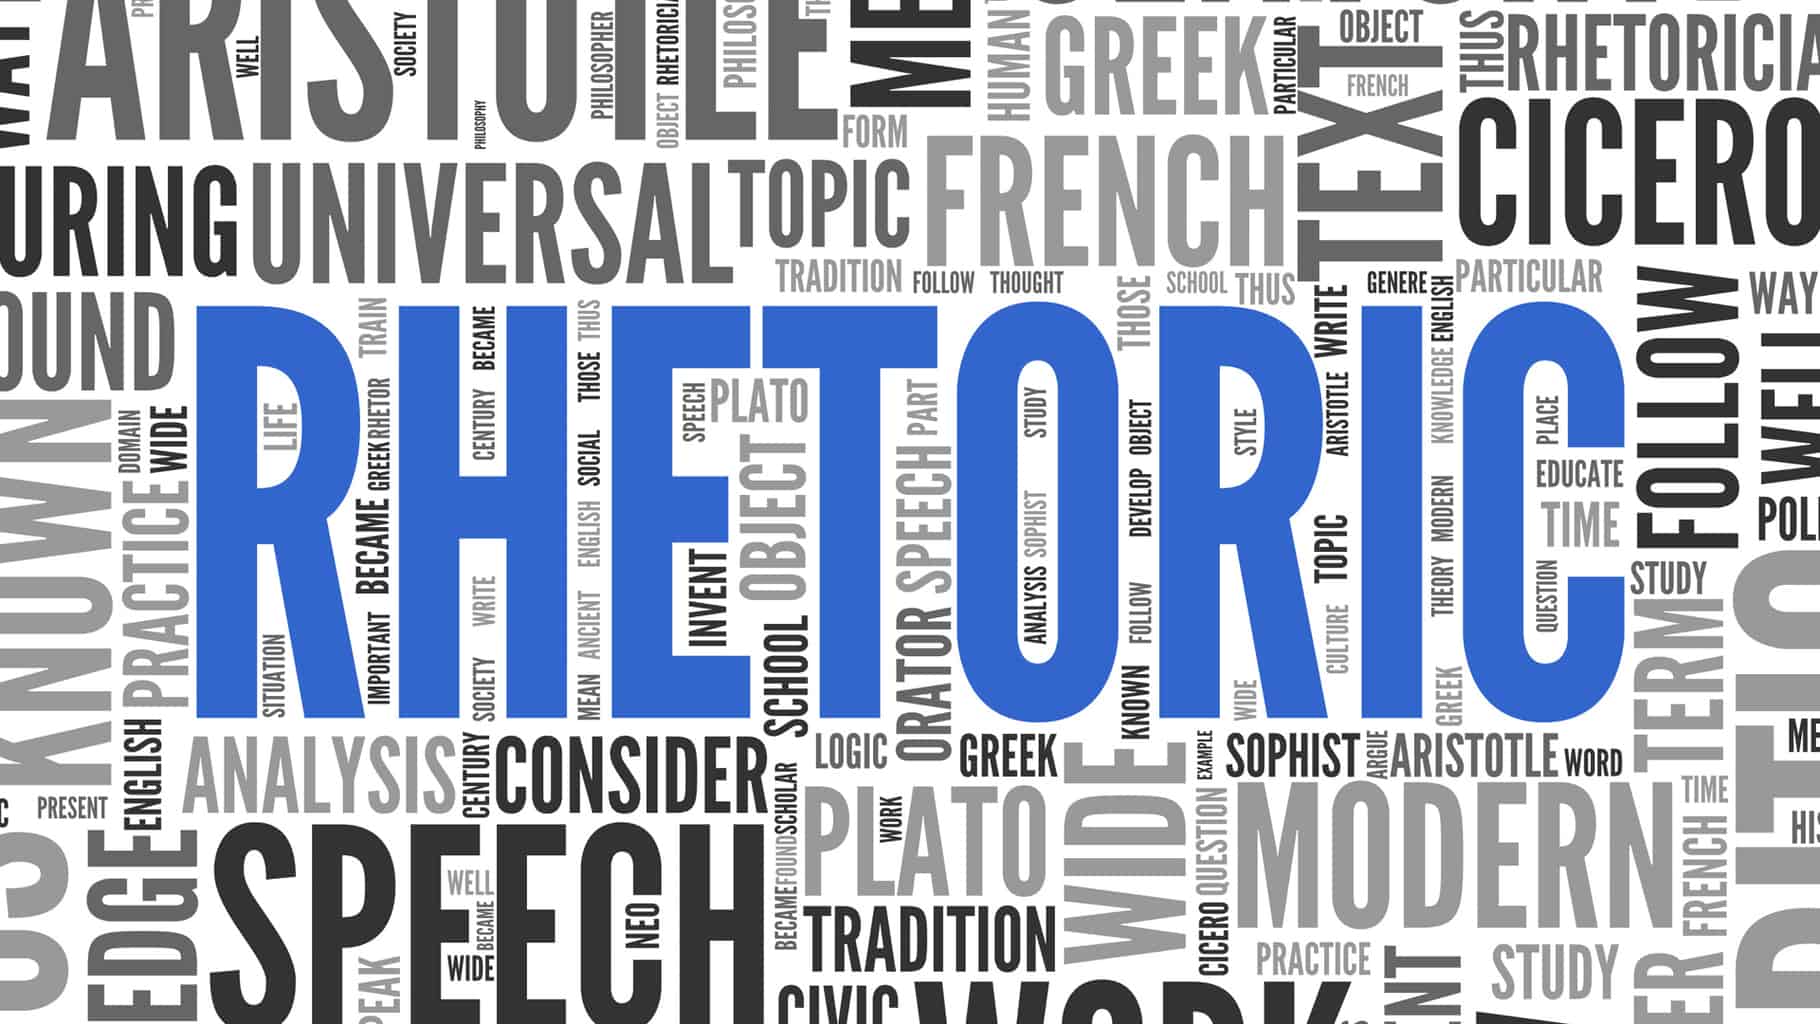 rhetorical devices definition and examples